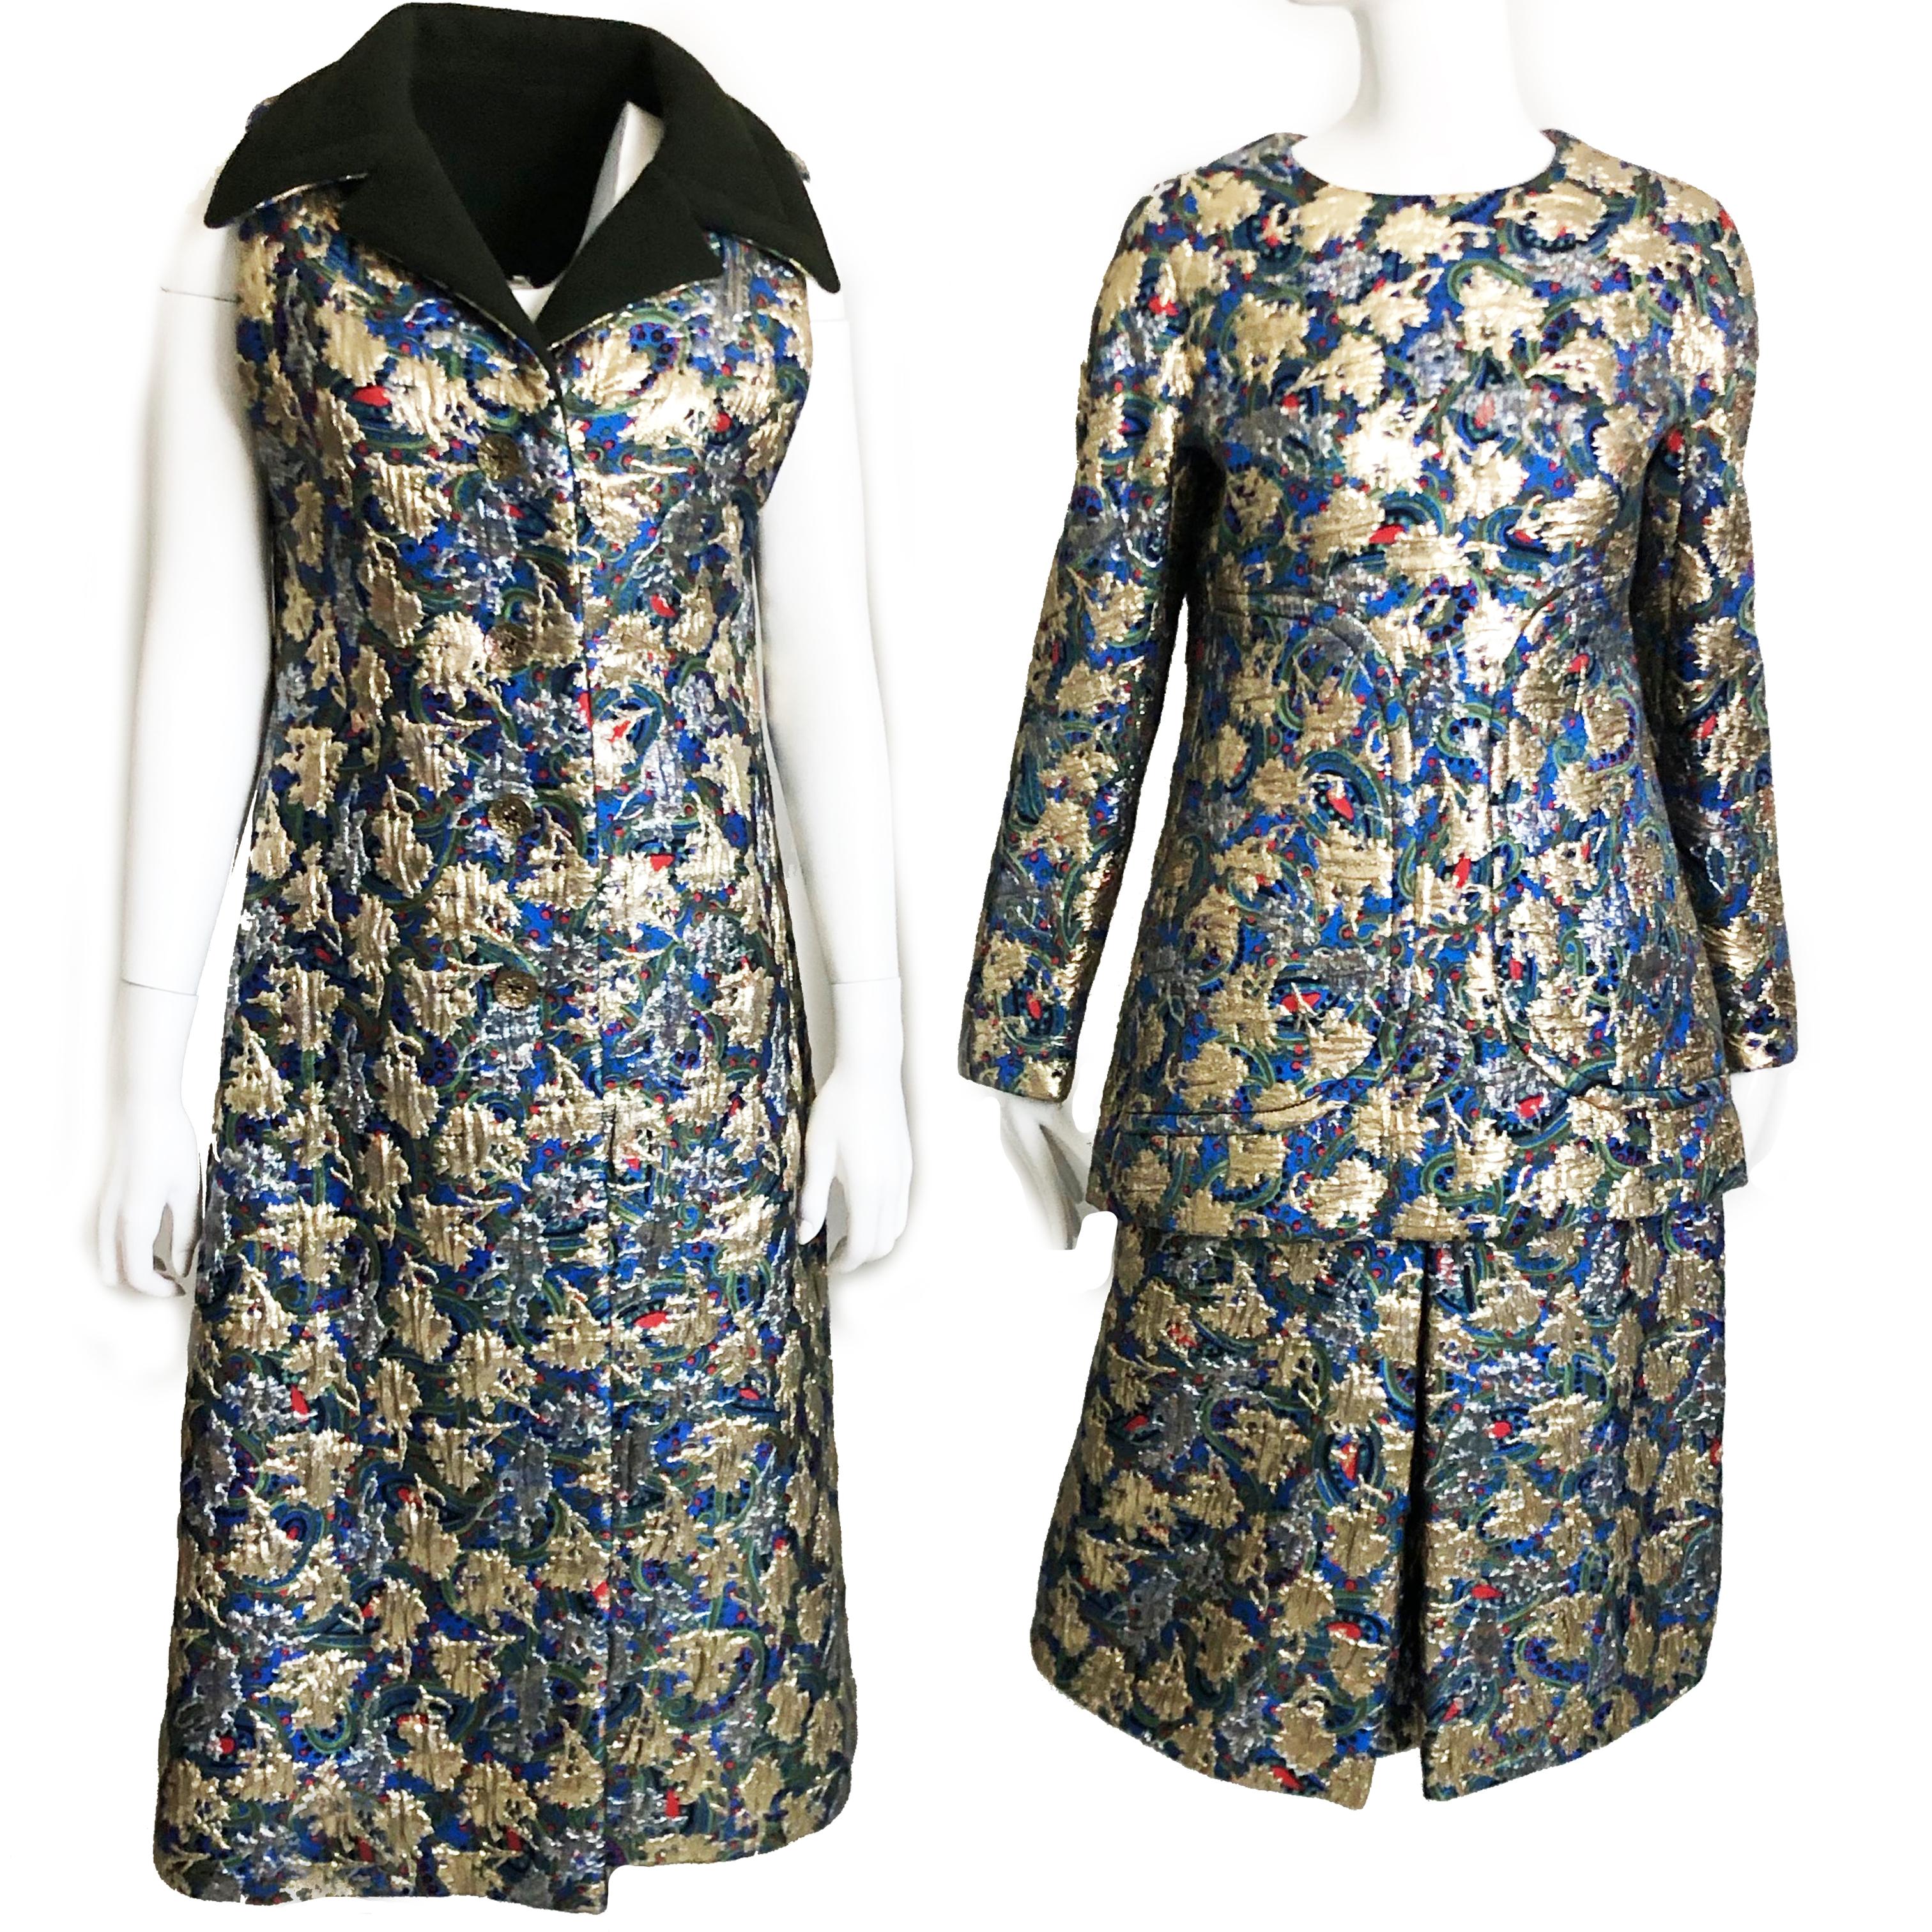 Gorgeous vintage 60s 3pc Long Vest, Top & Skirt, designed by James Galanos. The metallic brocade is simply fabulous! Wear together or pair with your other vintage pieces!  Outstanding quality on this set and it definitely brings a retro vibe!

Made